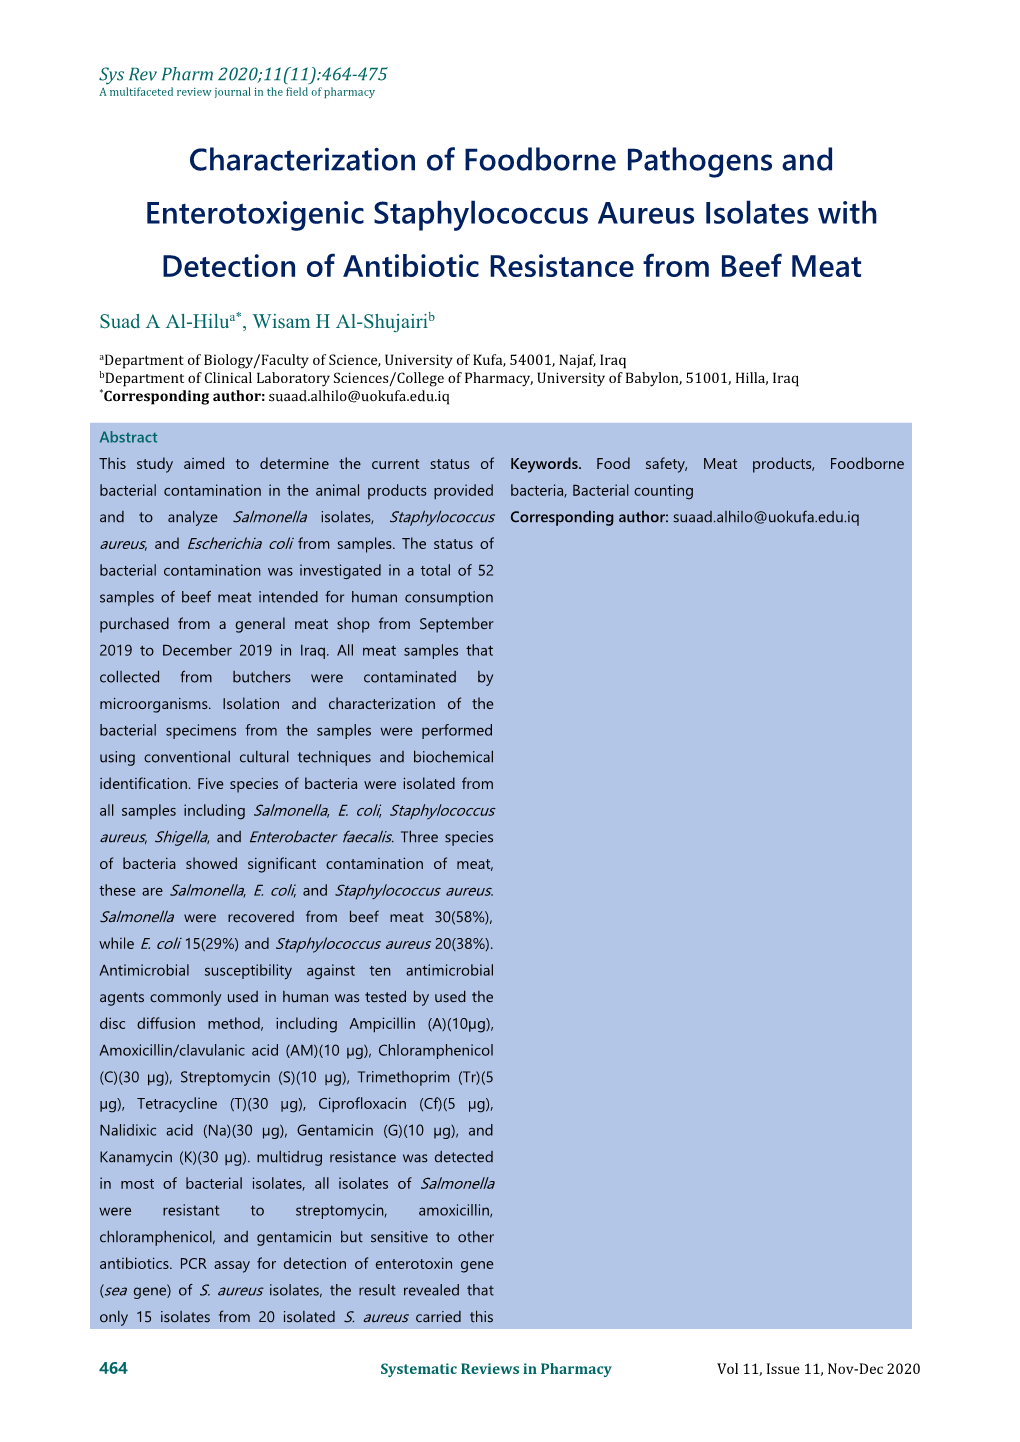 Characterization of Foodborne Pathogens and Enterotoxigenic Staphylococcus Aureus Isolates with Detection of Antibiotic Resistance from Beef Meat